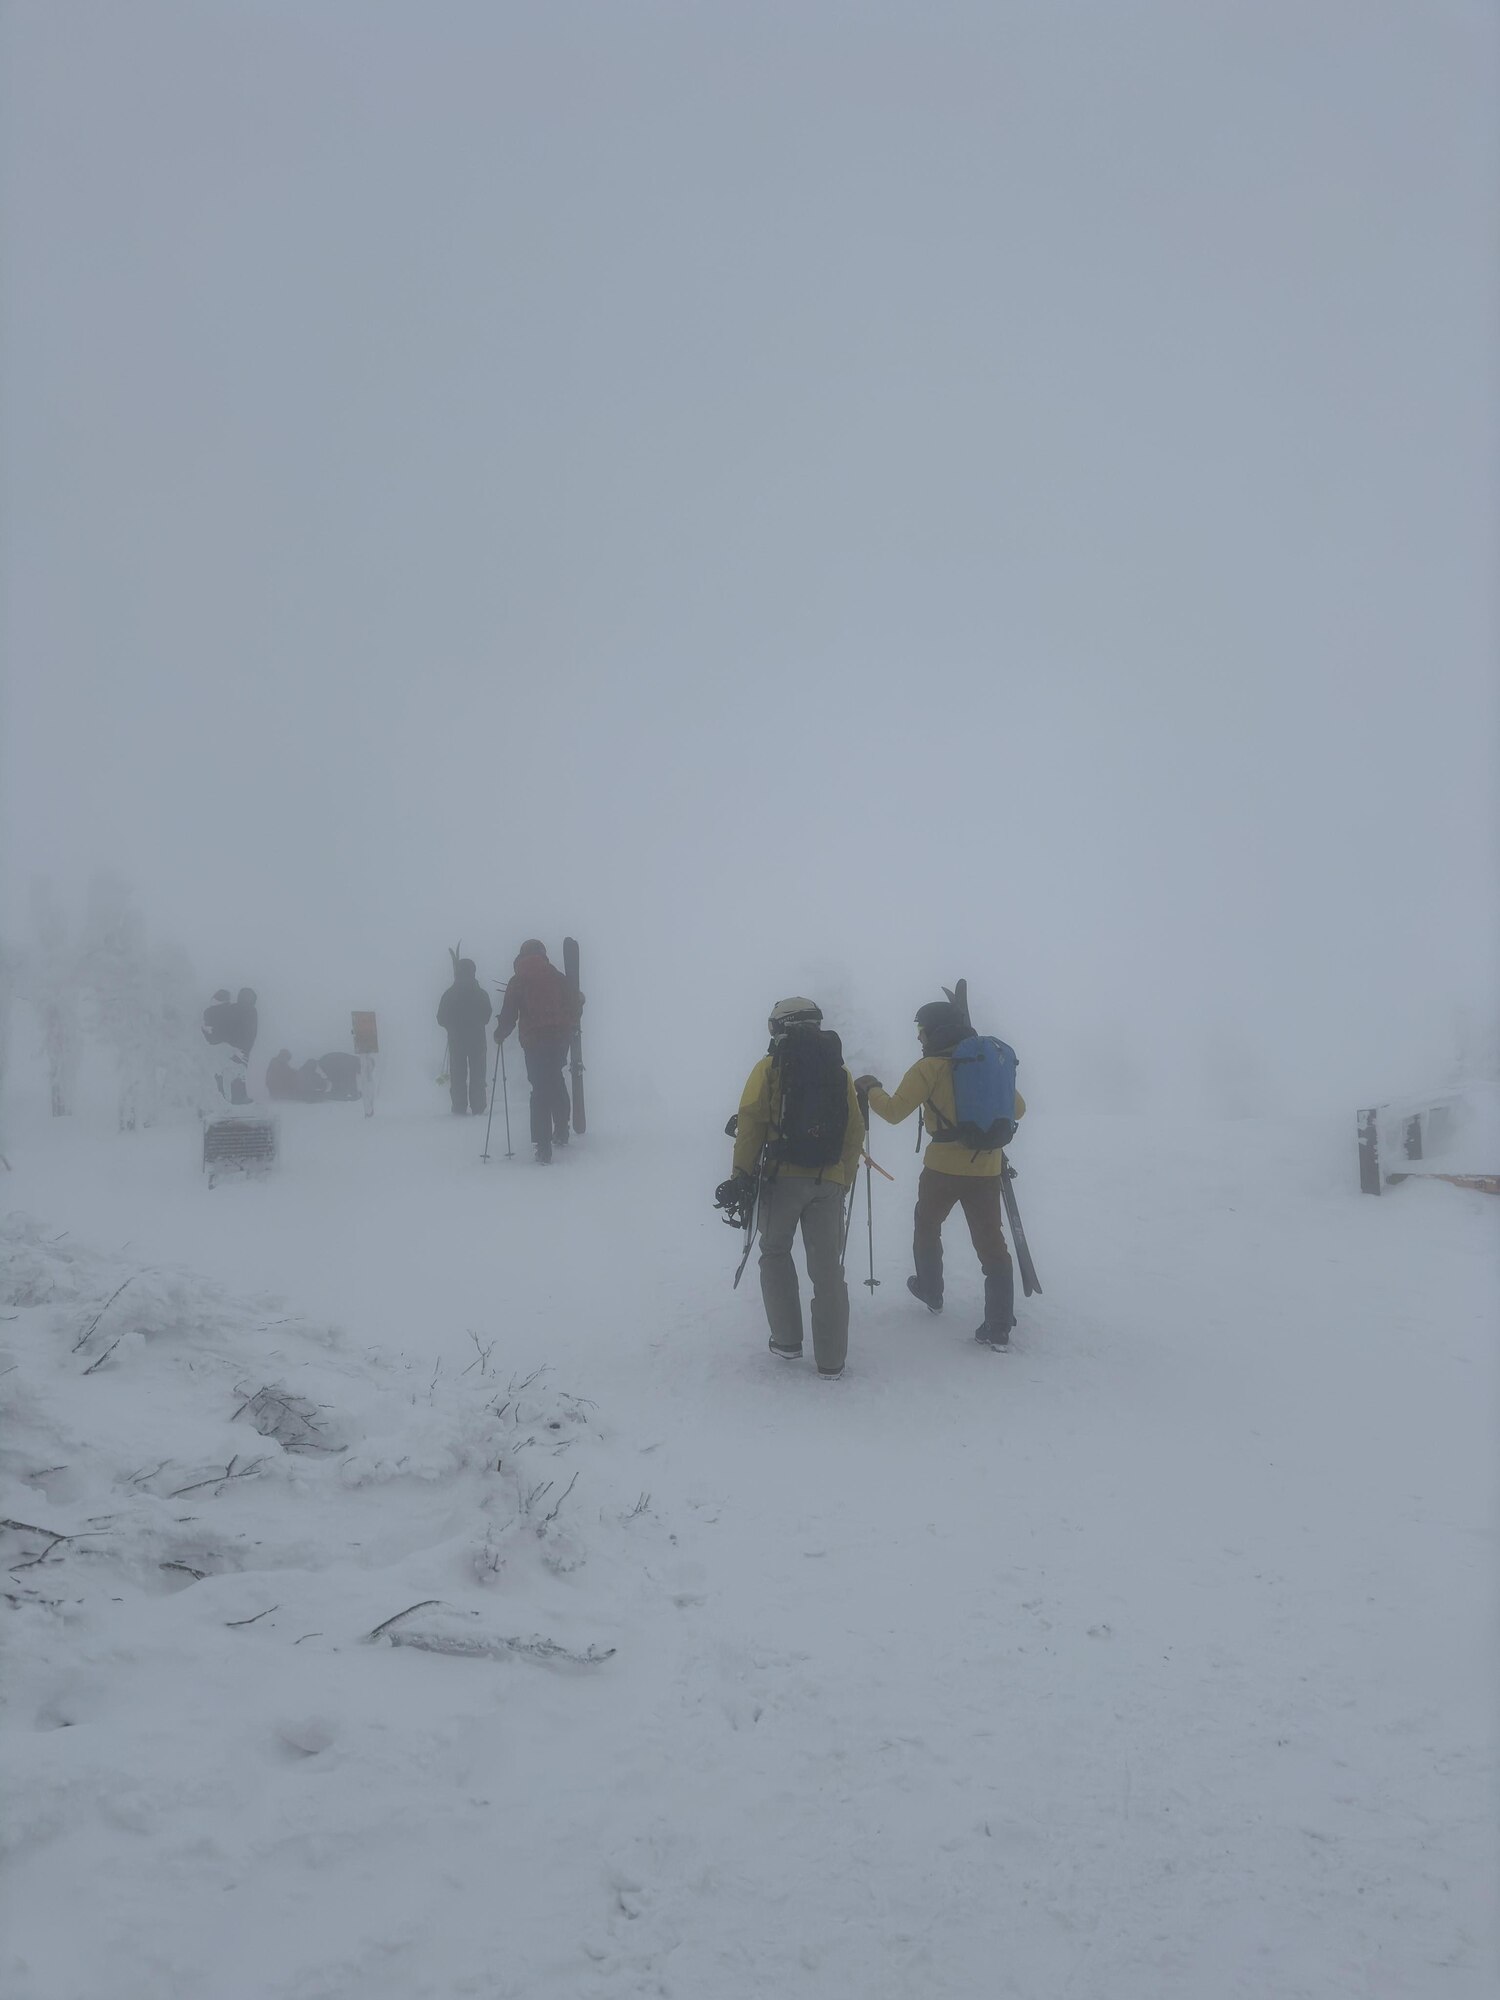 Participants of a search and rescue team move down the mountain during a snow storm after finding the missing member at Hakkoda Range, Japan, Dec. 29, 2023.